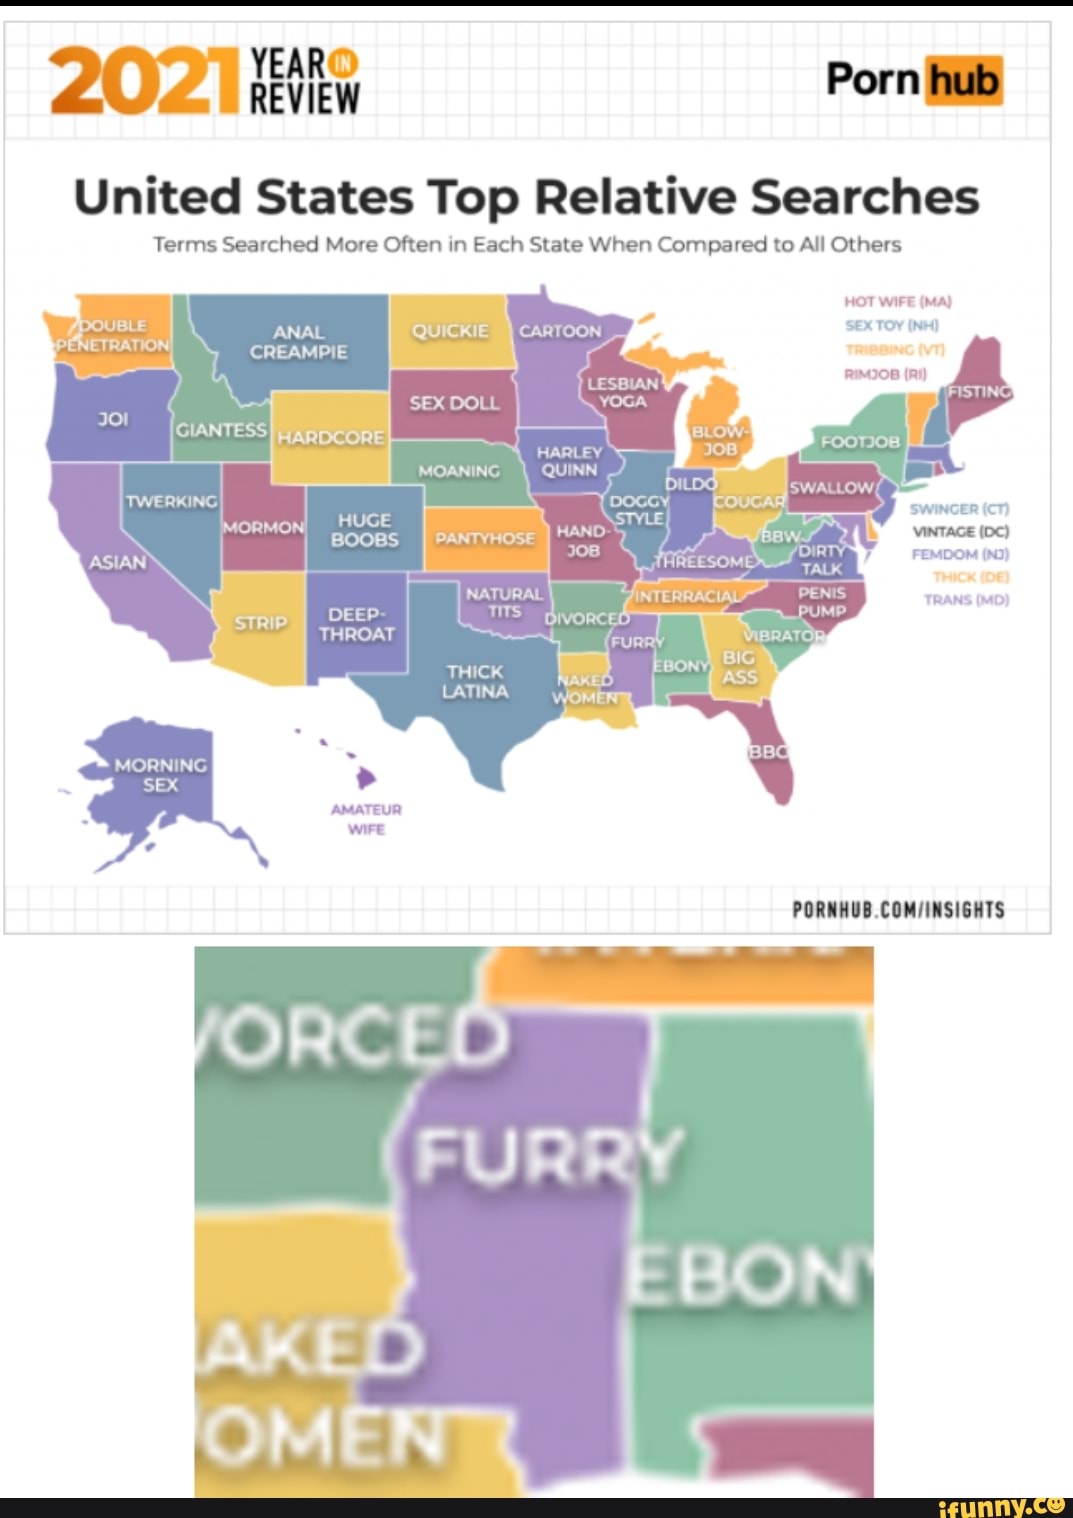 REVIEW Porn hub United States Top Relative Searches Terms Searched More Often in Each State When